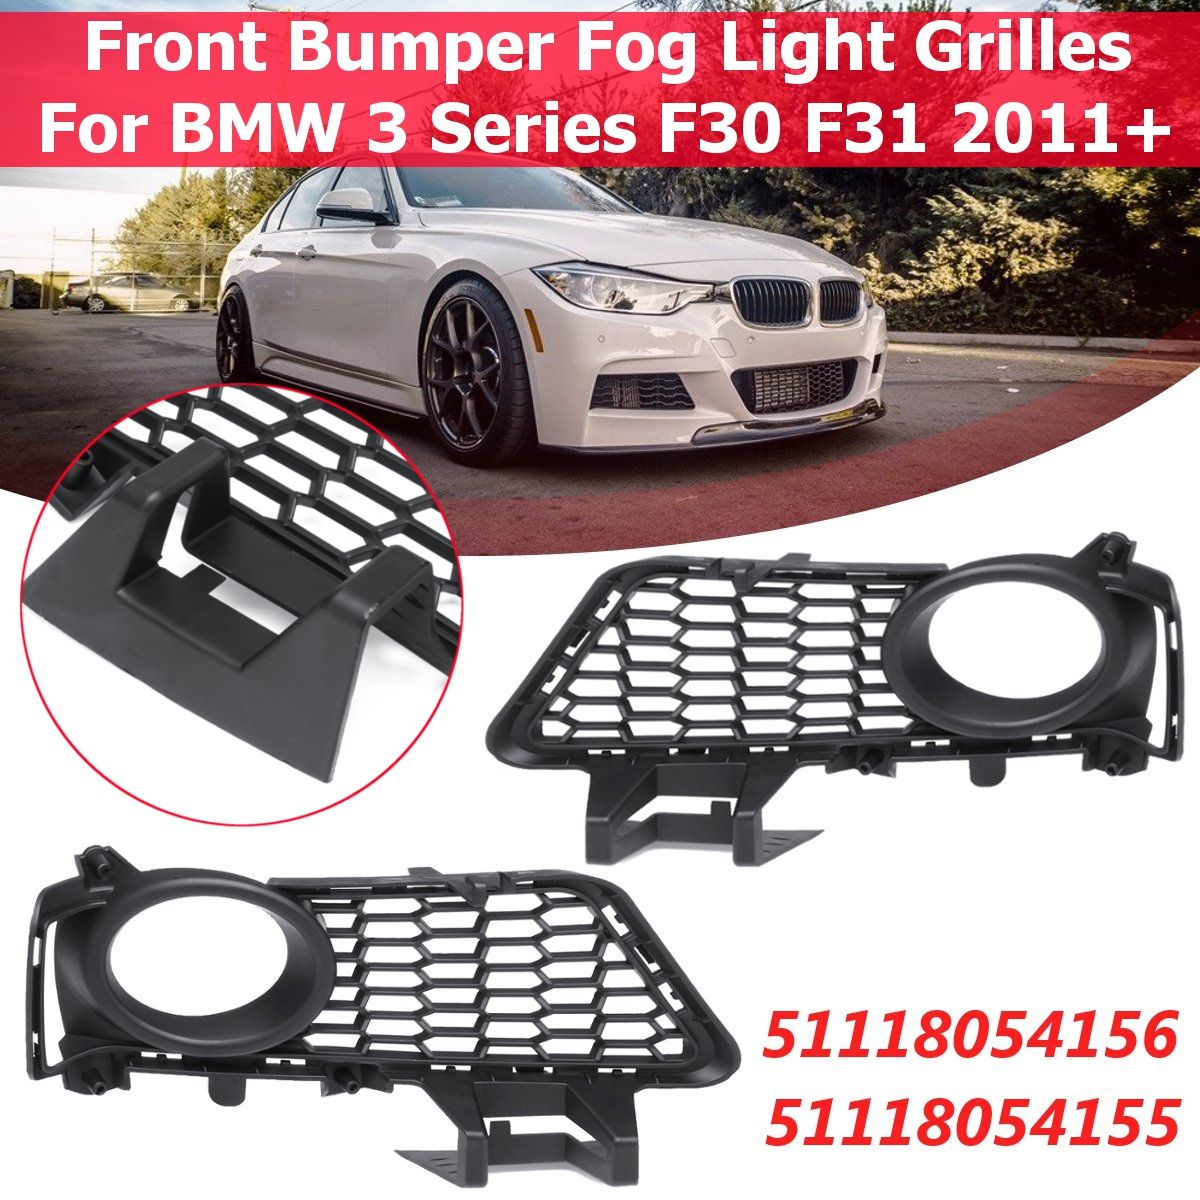 RS4-Style-Honeycomb-Mesh-Front-Bumper-Fog-Light-Grill-Grille-For-BMW-3-Serises-F30-F31-2011-2015-1739613